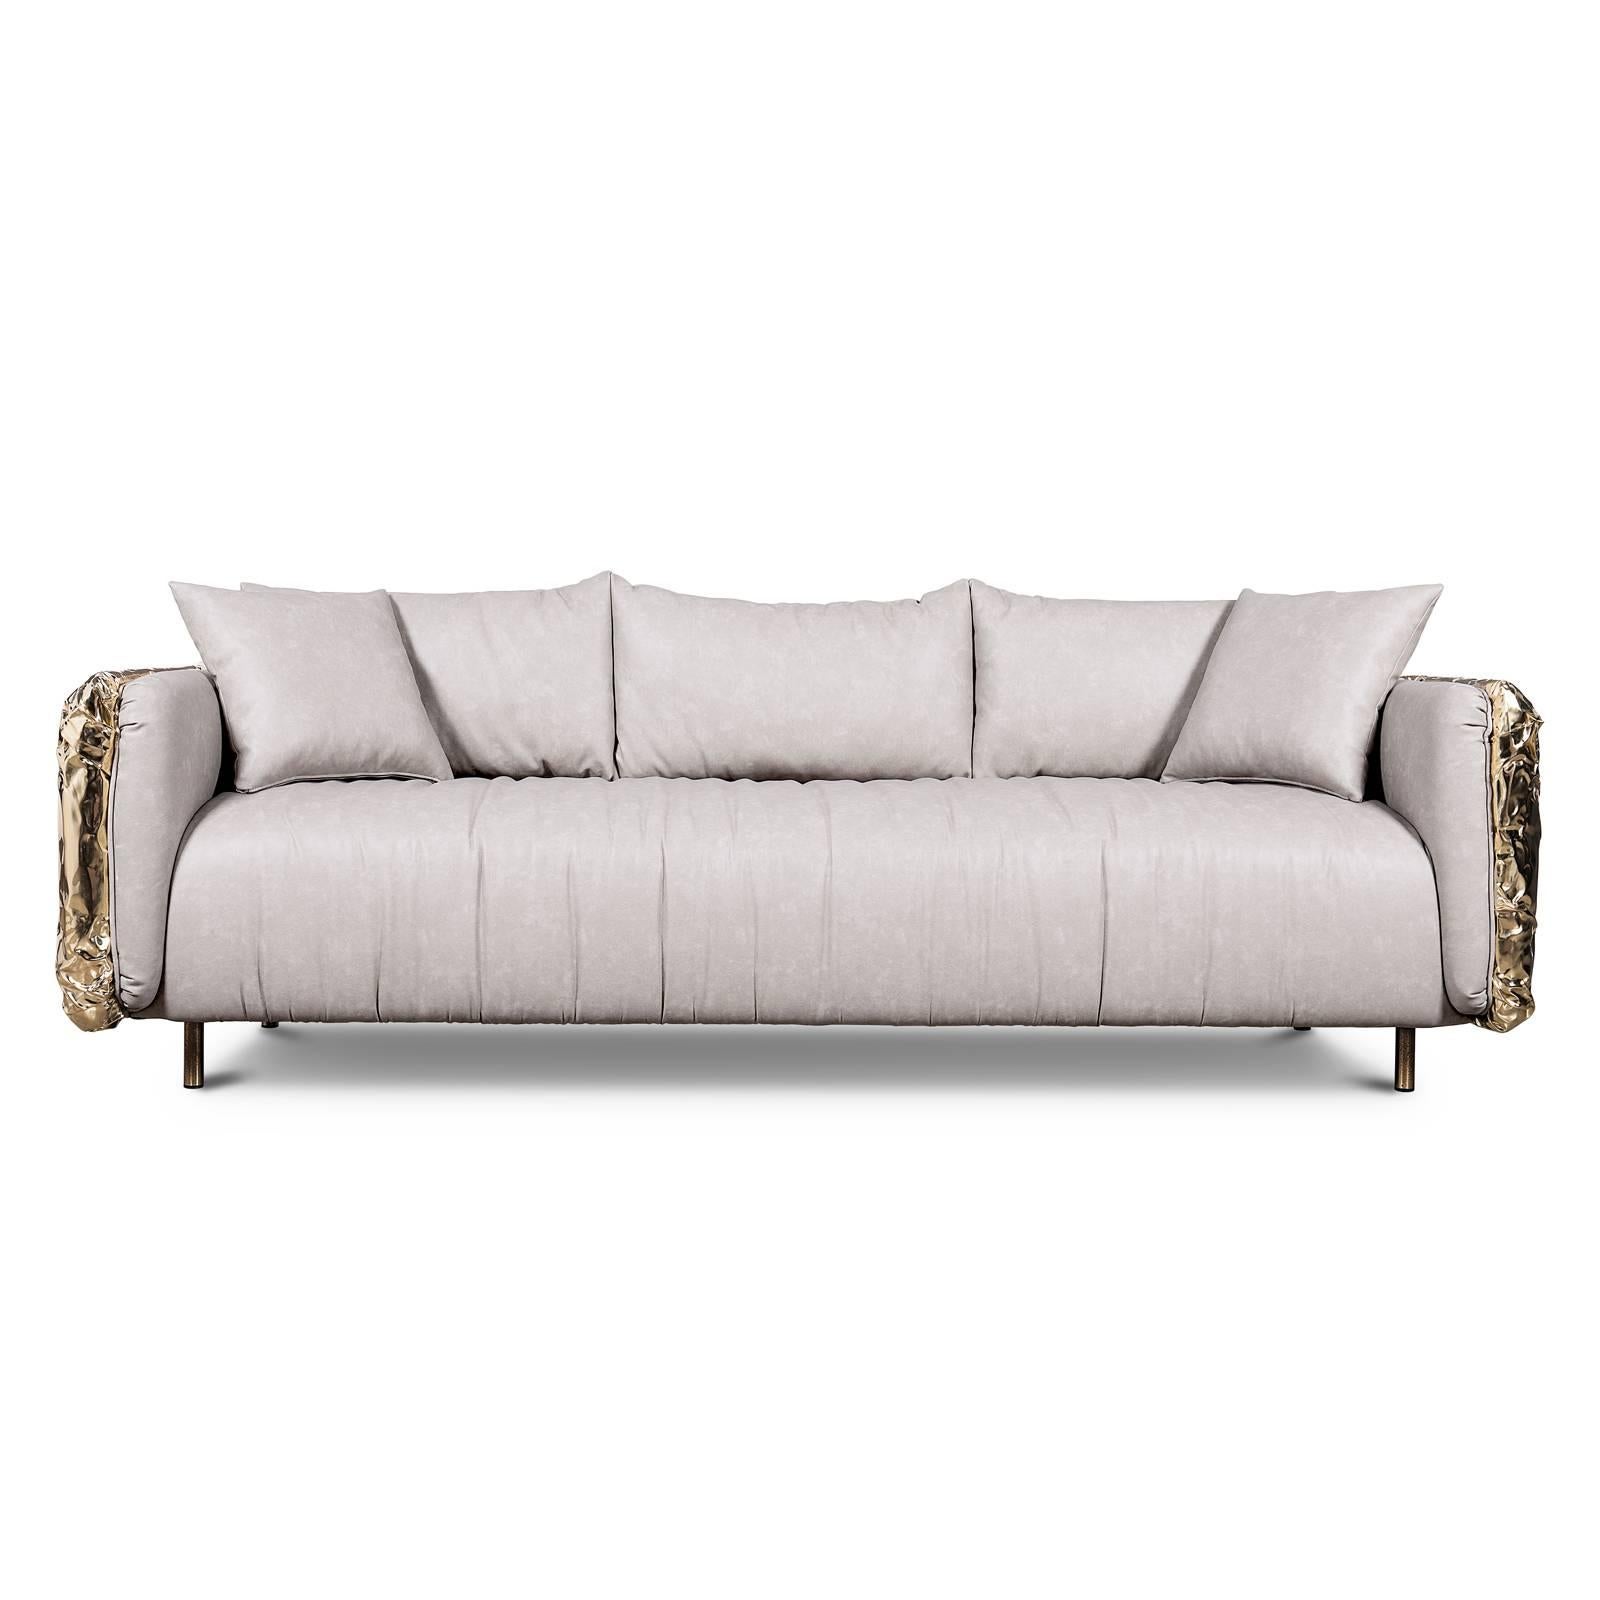 Sofa gold safe upholstered with grey genuine leather.
Back and sides made in solid hammered polished brass.
Also available in hammered patinated brass and also available
in armchair gold safe.
